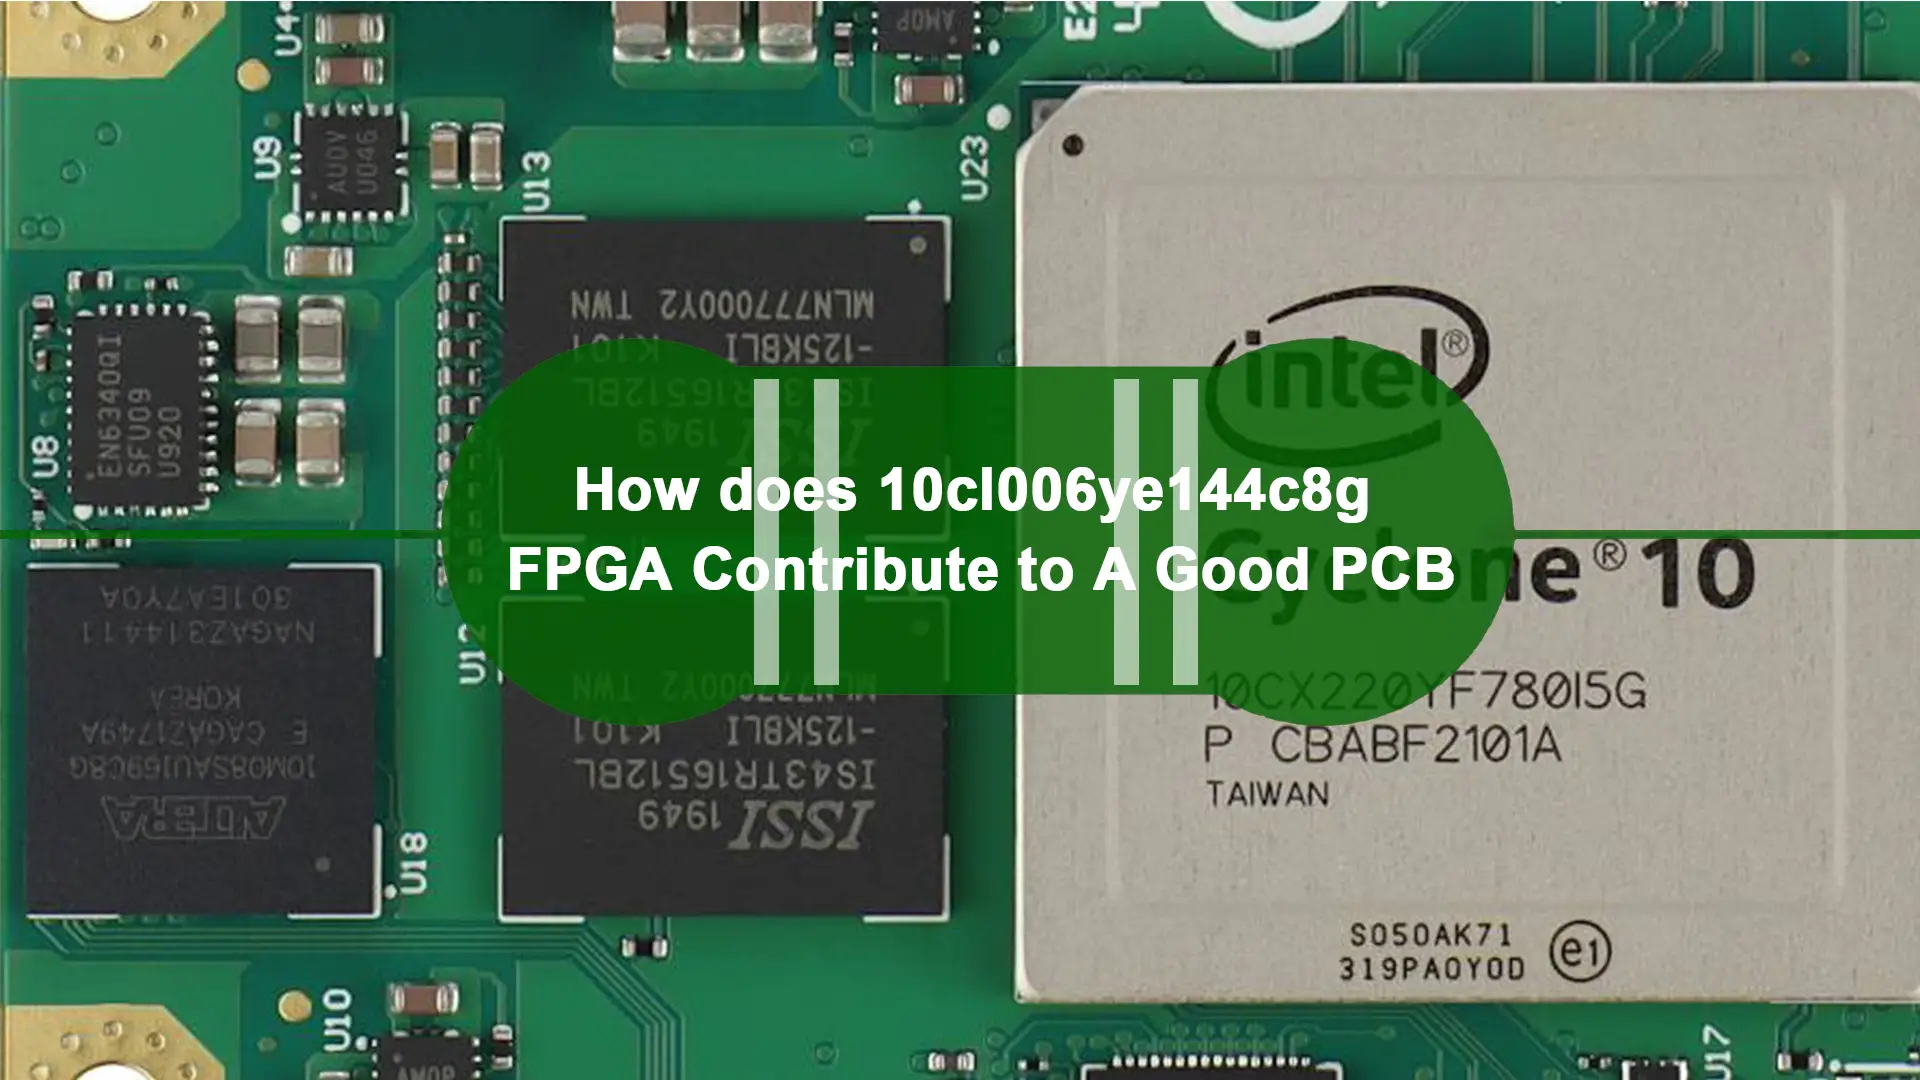 How does 10cl006ye144c8g FPGA Contribute to A Good PCB